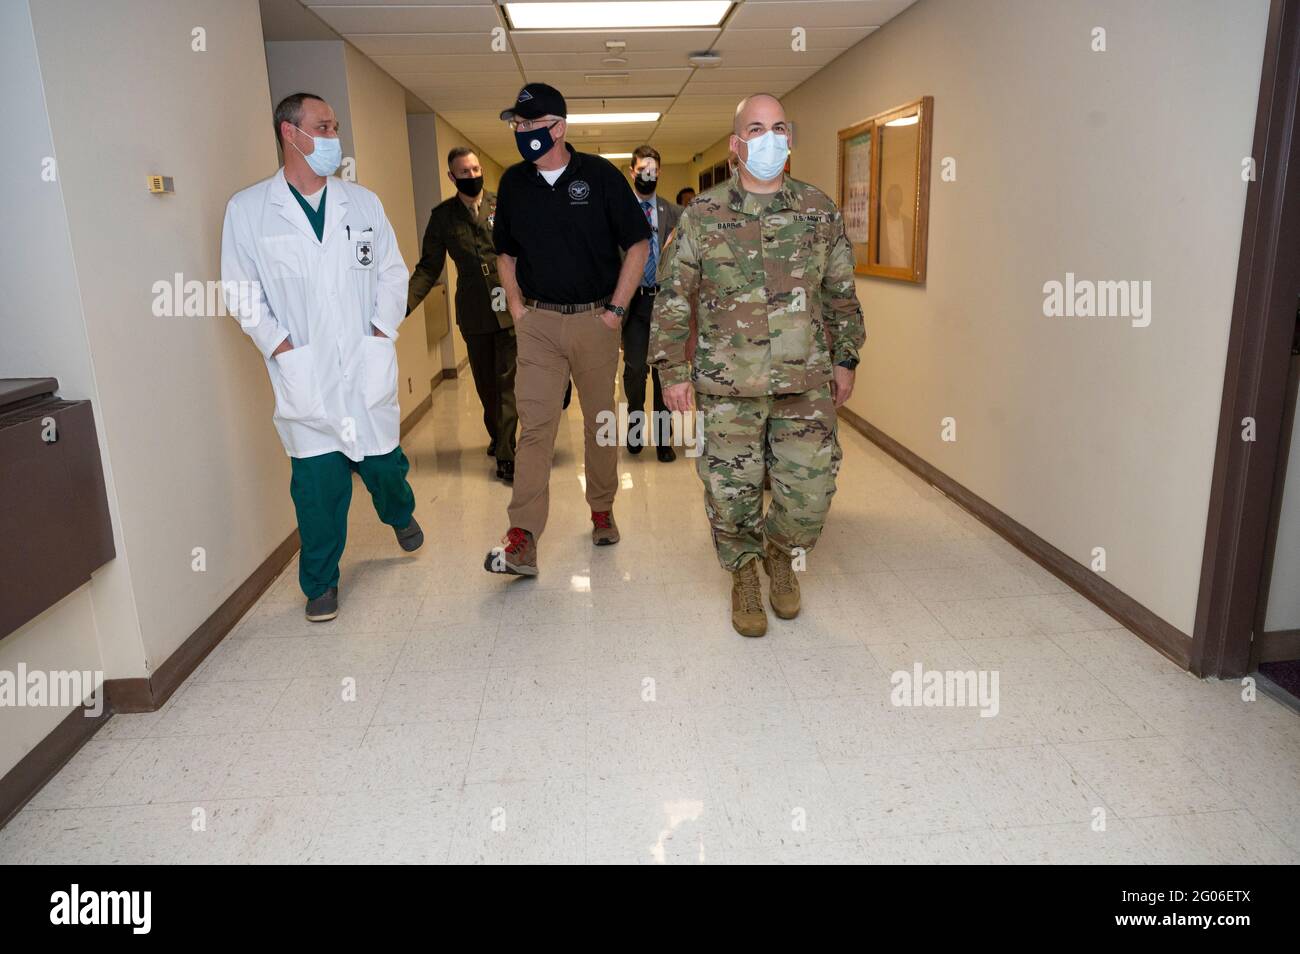 Reportage:  Acting Defense Secretary Chris Miller walks with the director of medicine at Walter Reed National Military Medical Center, Army Col. Jeremy Edwards, and Walter Reed Director Army Col. Andrew Barr, after receiving a vaccination for COVID-19, Walter Reed National Military Medical Center, Bethesda, Md., Dec. 14, 2020. Stock Photo